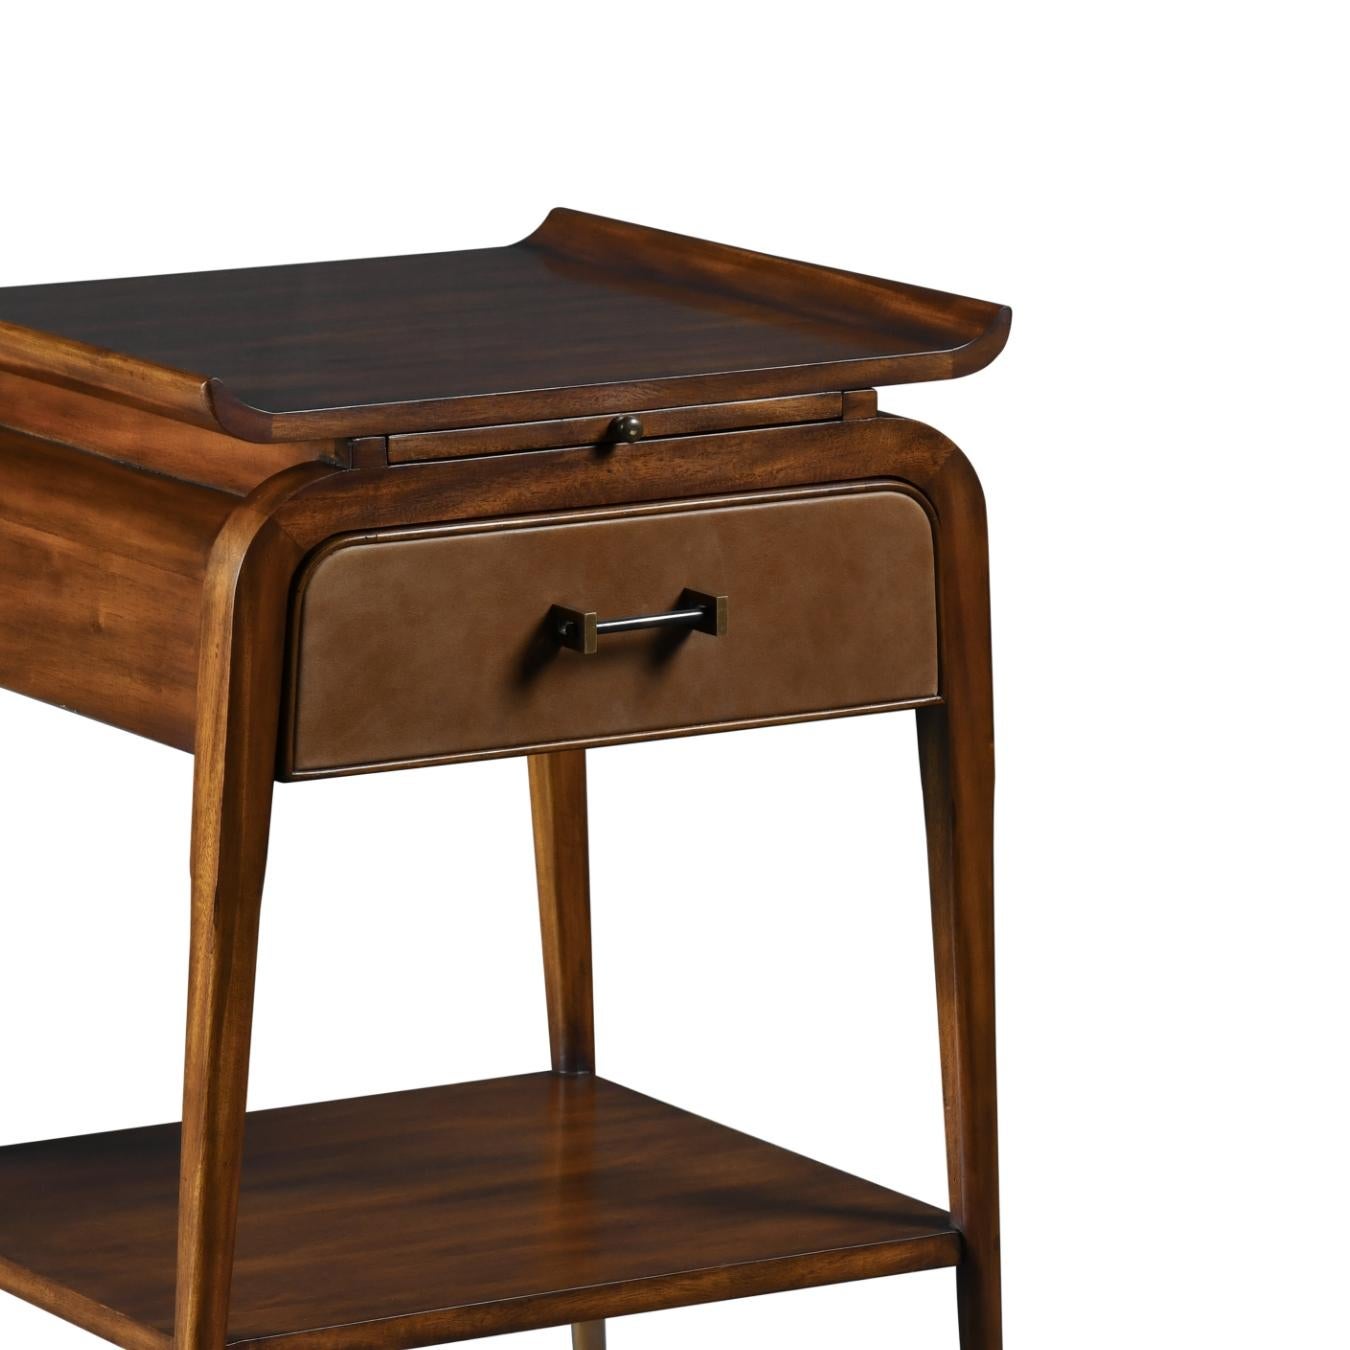 This night stand is inspired on the French 50’s with a hint of oriental influences. Its top has upwardly curved ends, a retractable table, leather covered drawer and finely pointed legs with brass caps. It also has a wide lower shelf, making this